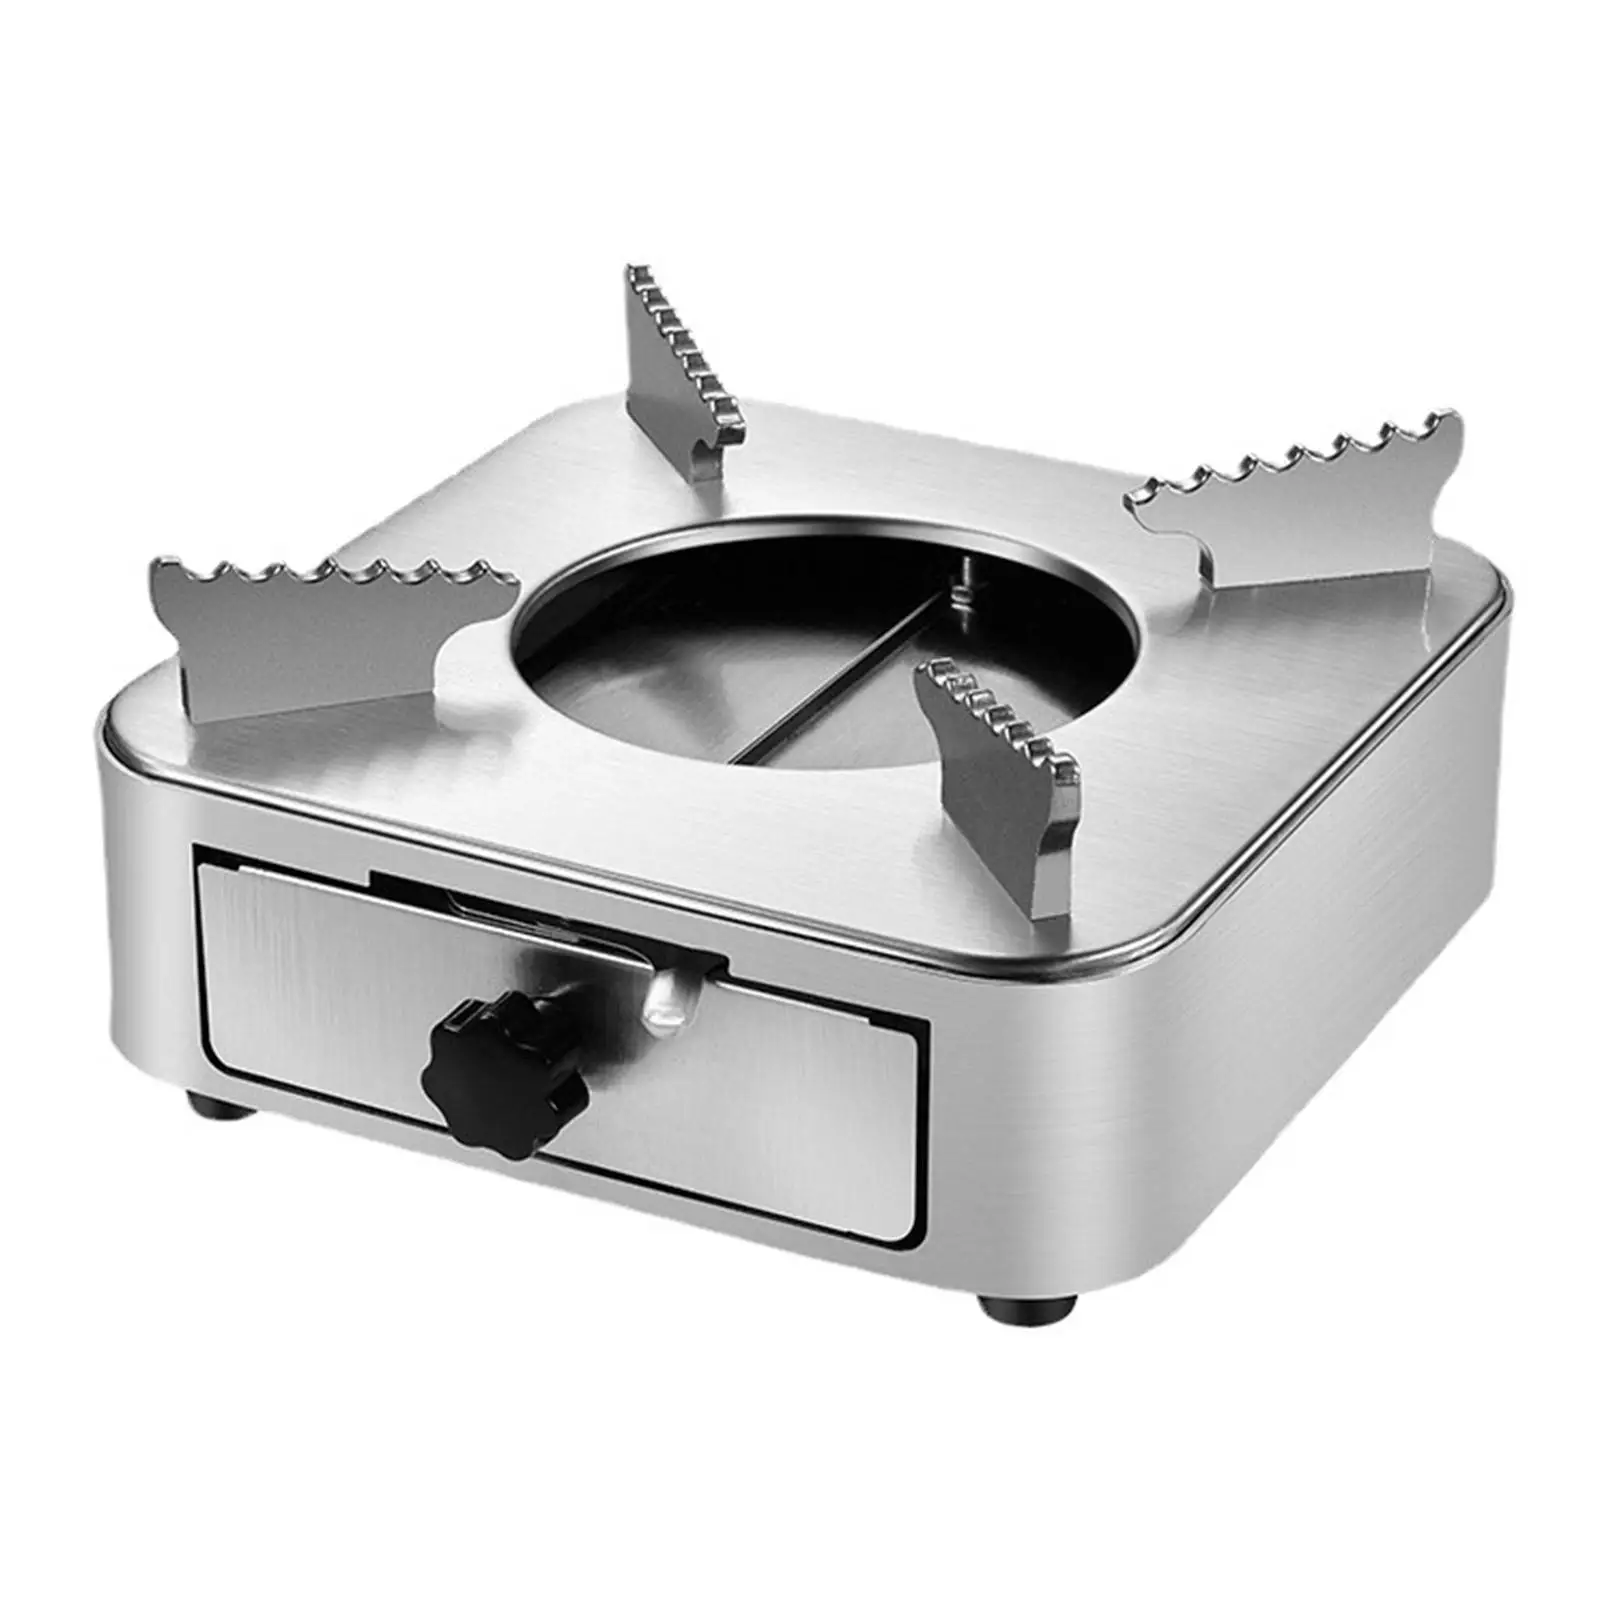 

Outdoor Camping Stove Portable Alcohol Stove Drawer Picnic Household Small Restaurant Fire Mini Boiler Dry Hote Boiler hot